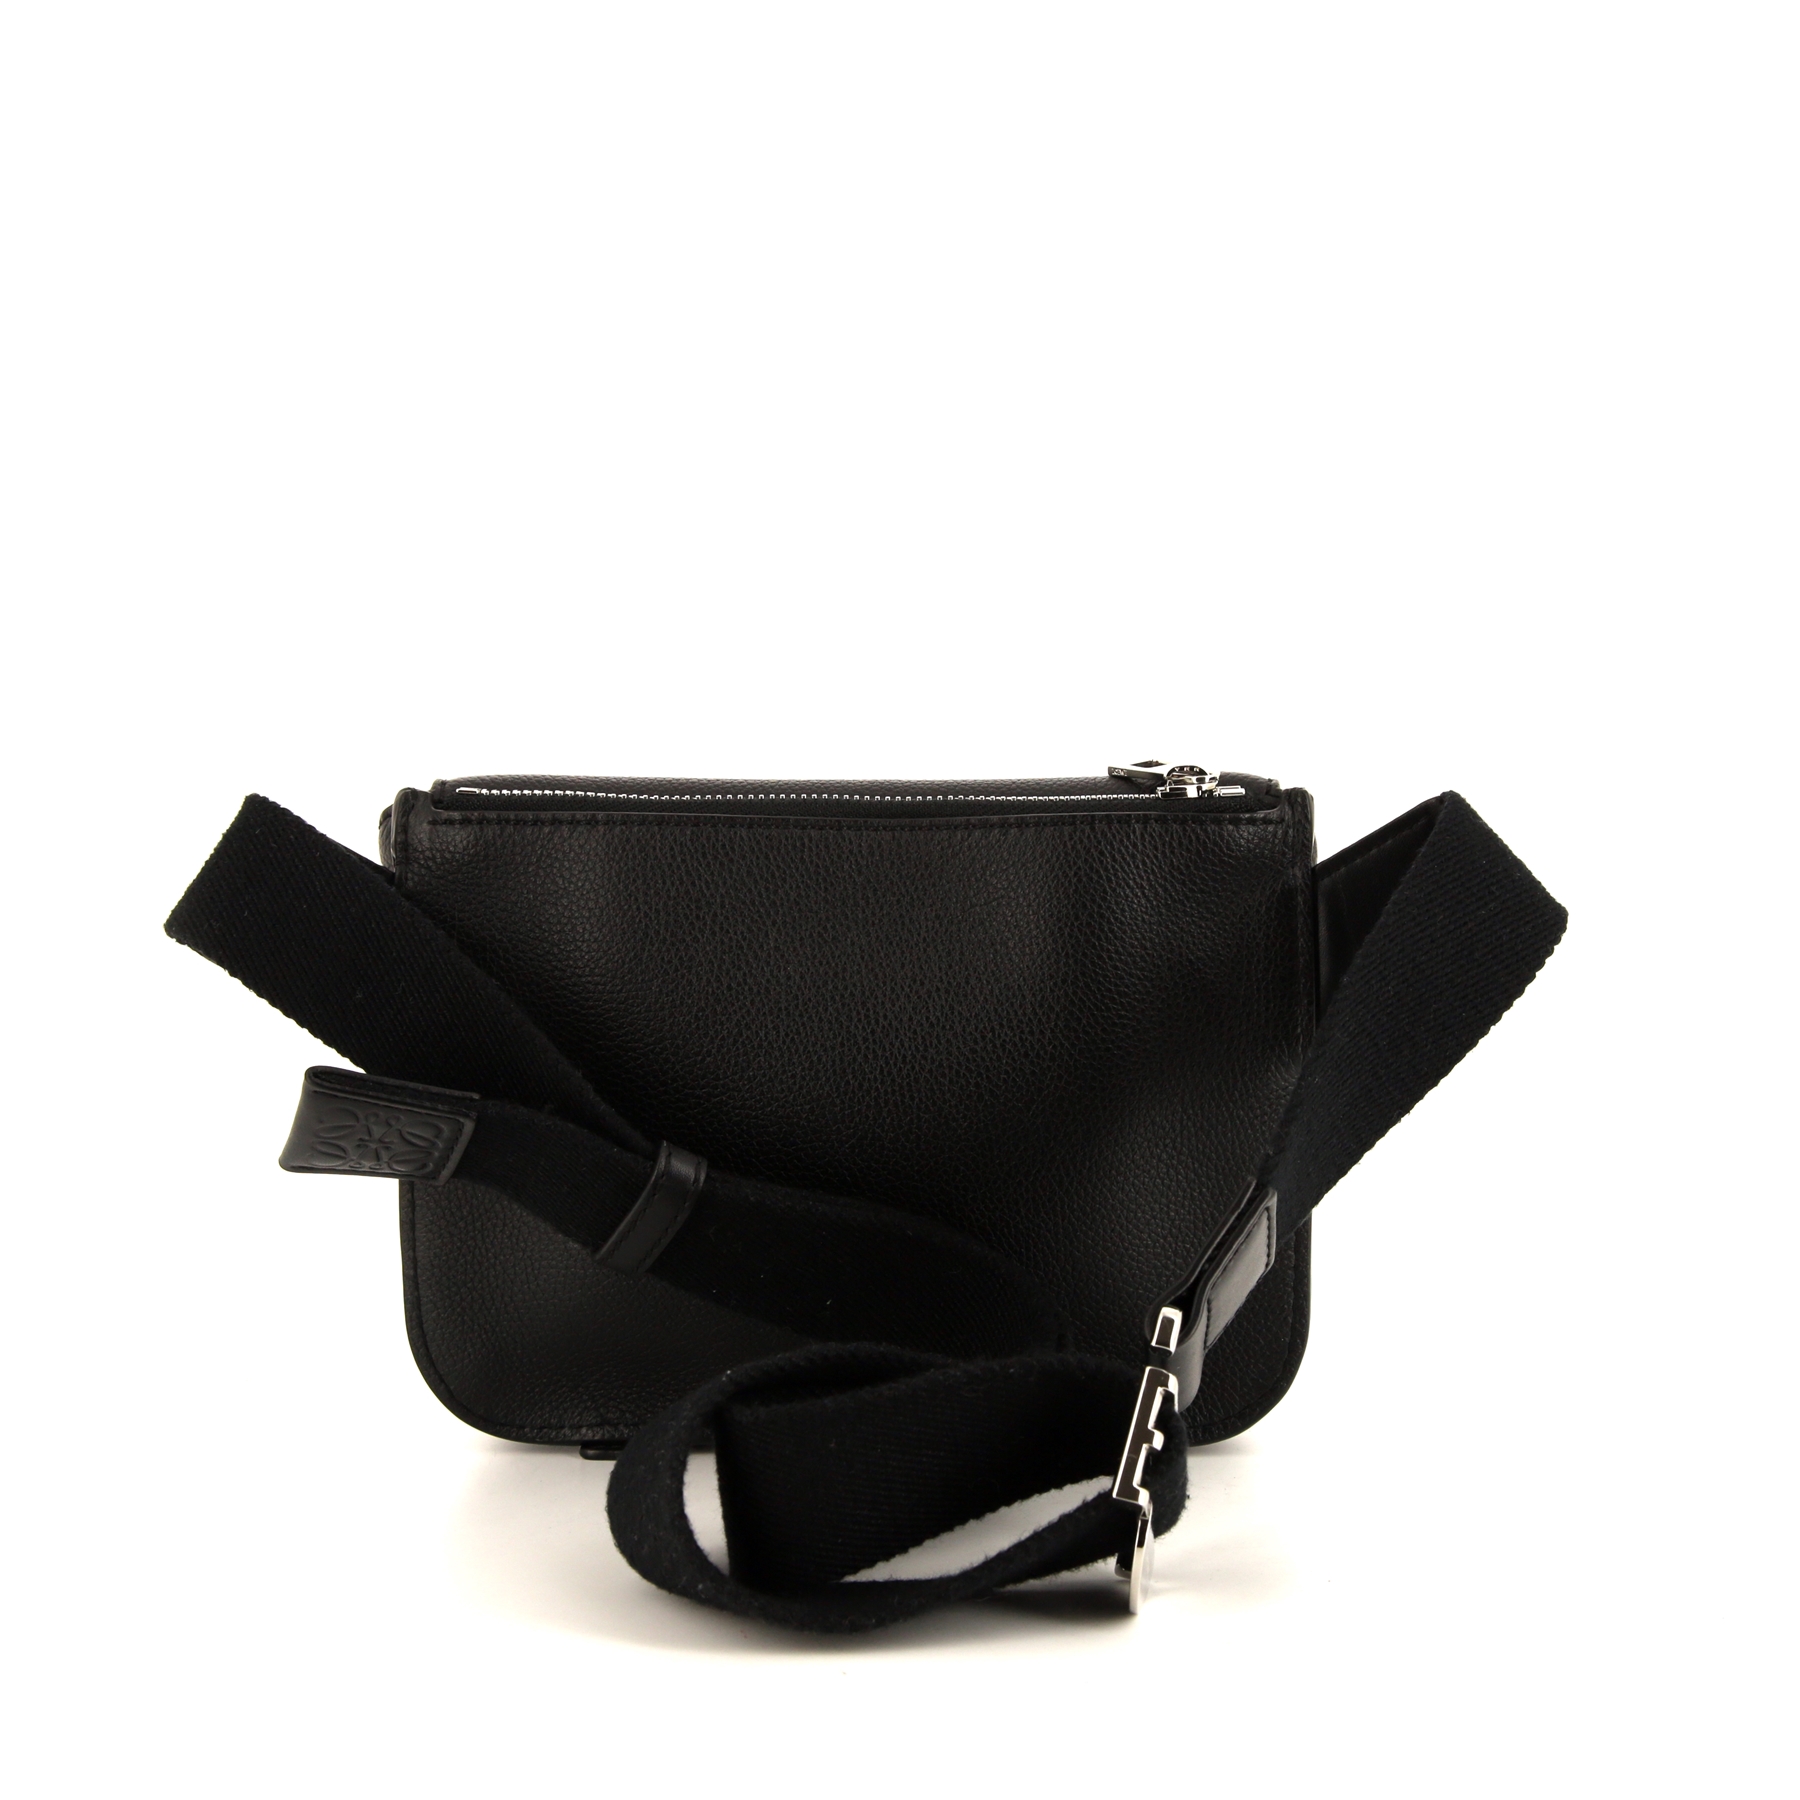 Military Bumbag Clutch-Belt In Black Grained Leather